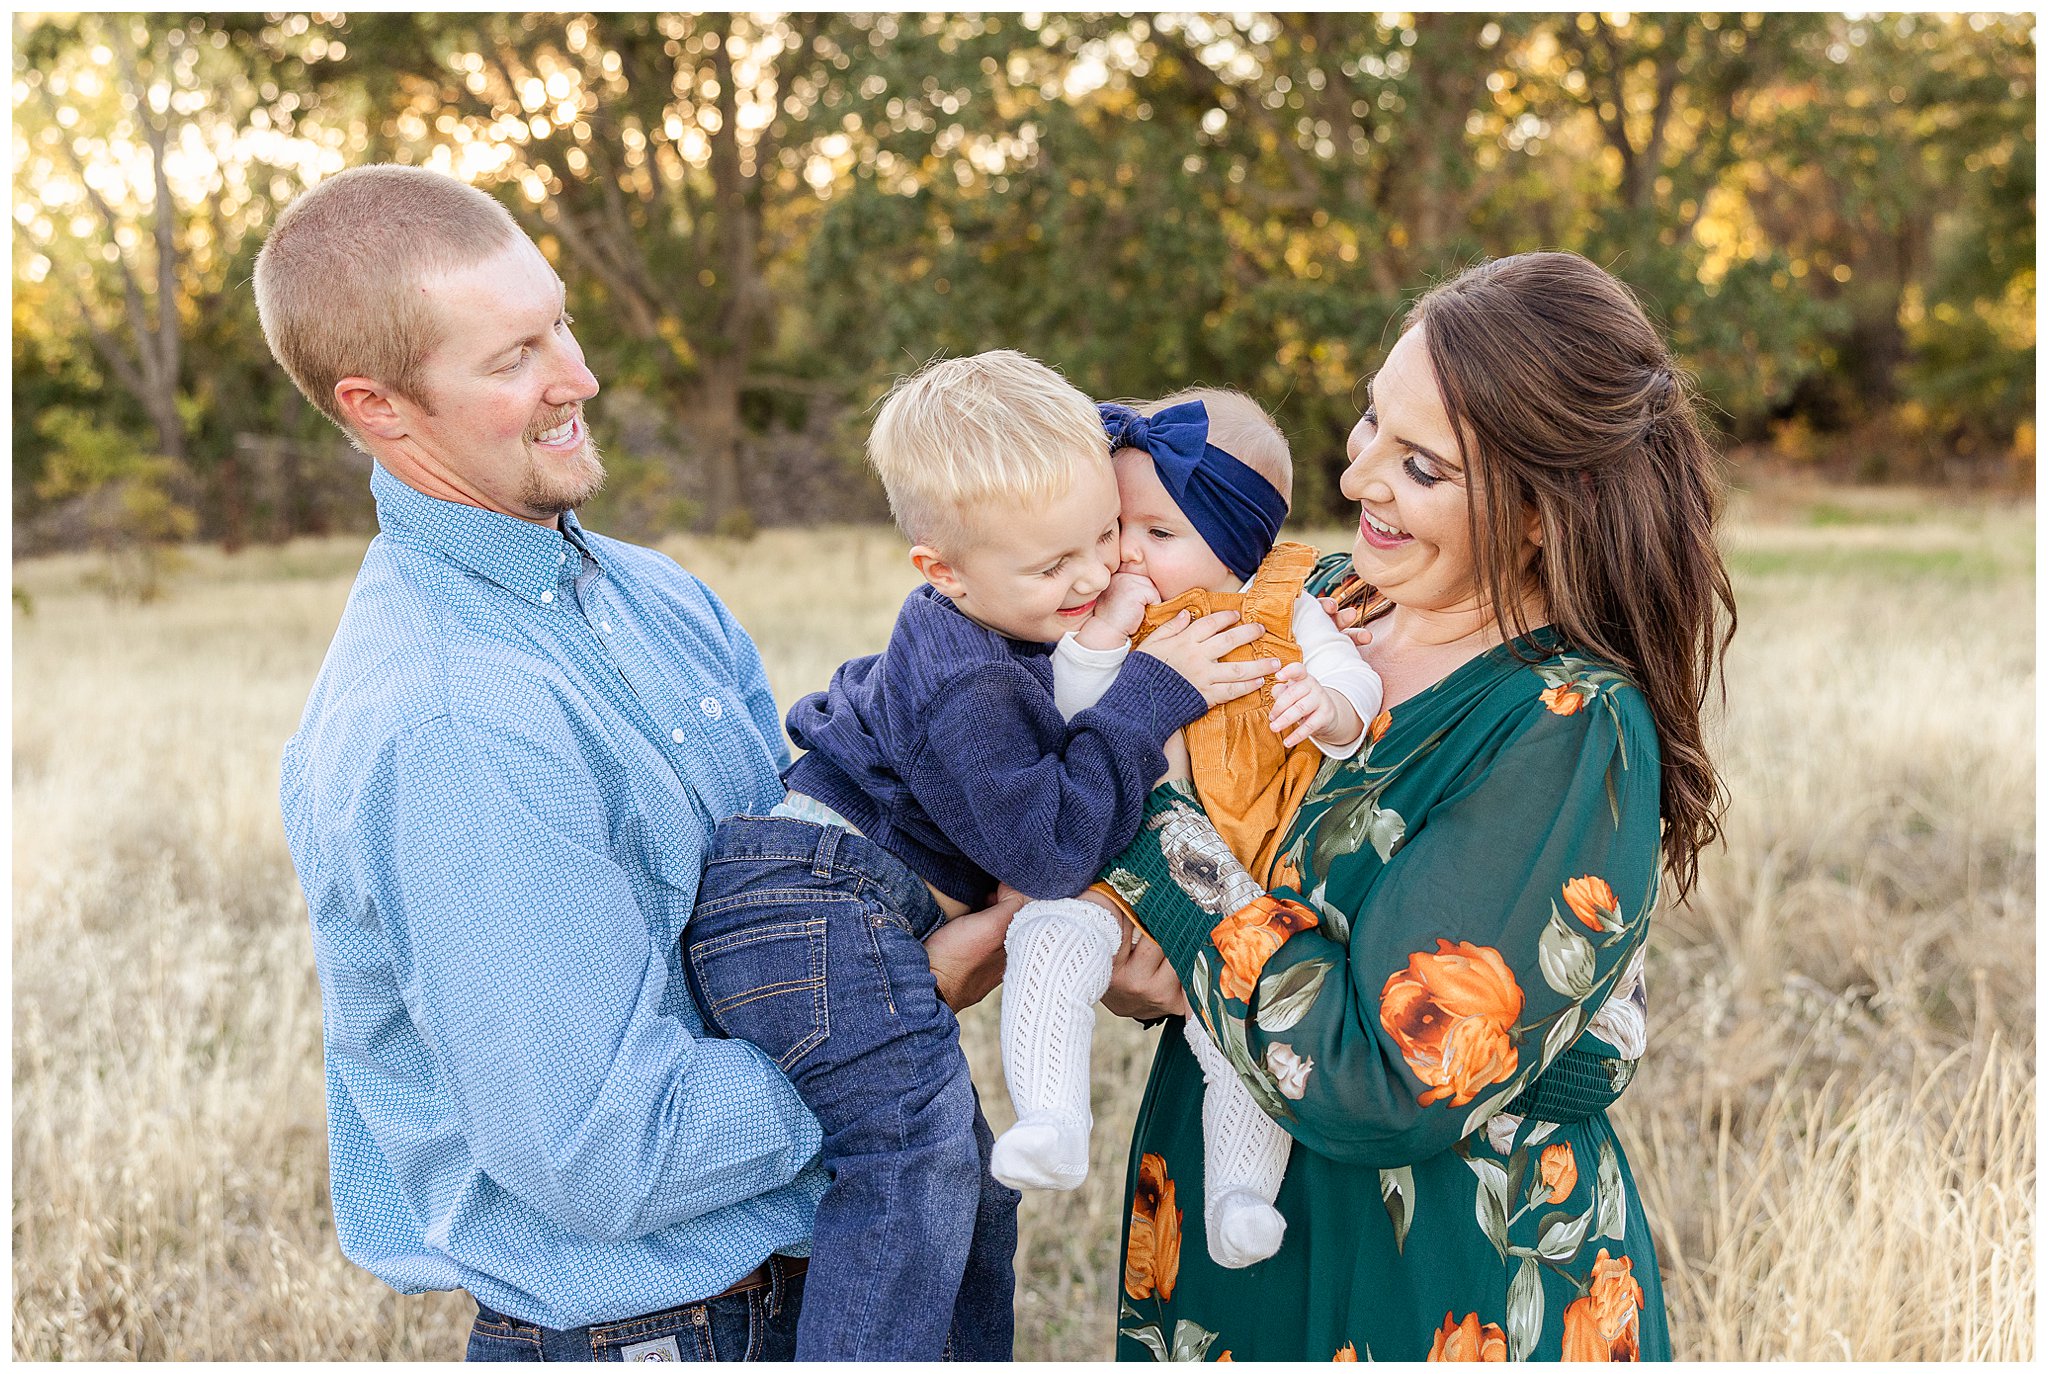 Fall Mini Sessions Meriam Park Chico CA Family White Wall Fall Colors Dress Baby Siblings,